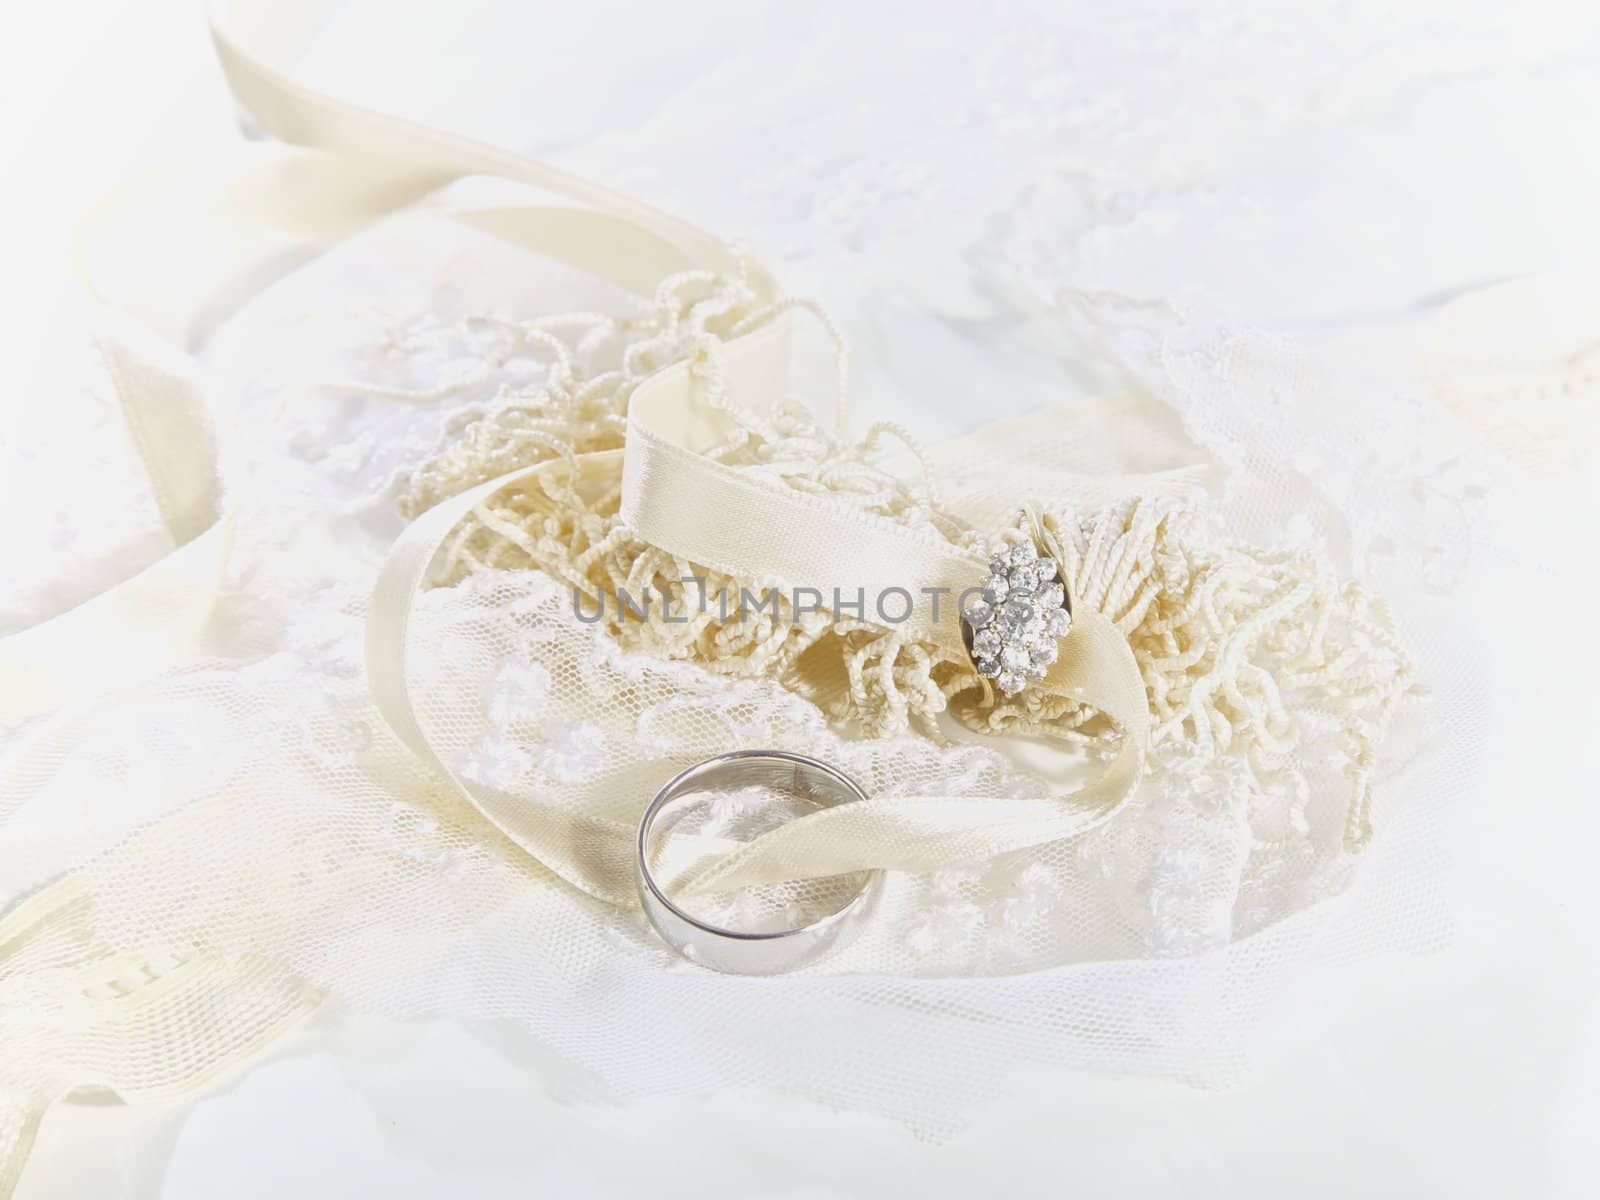 Wedding Rings With Fabric and Ribbons